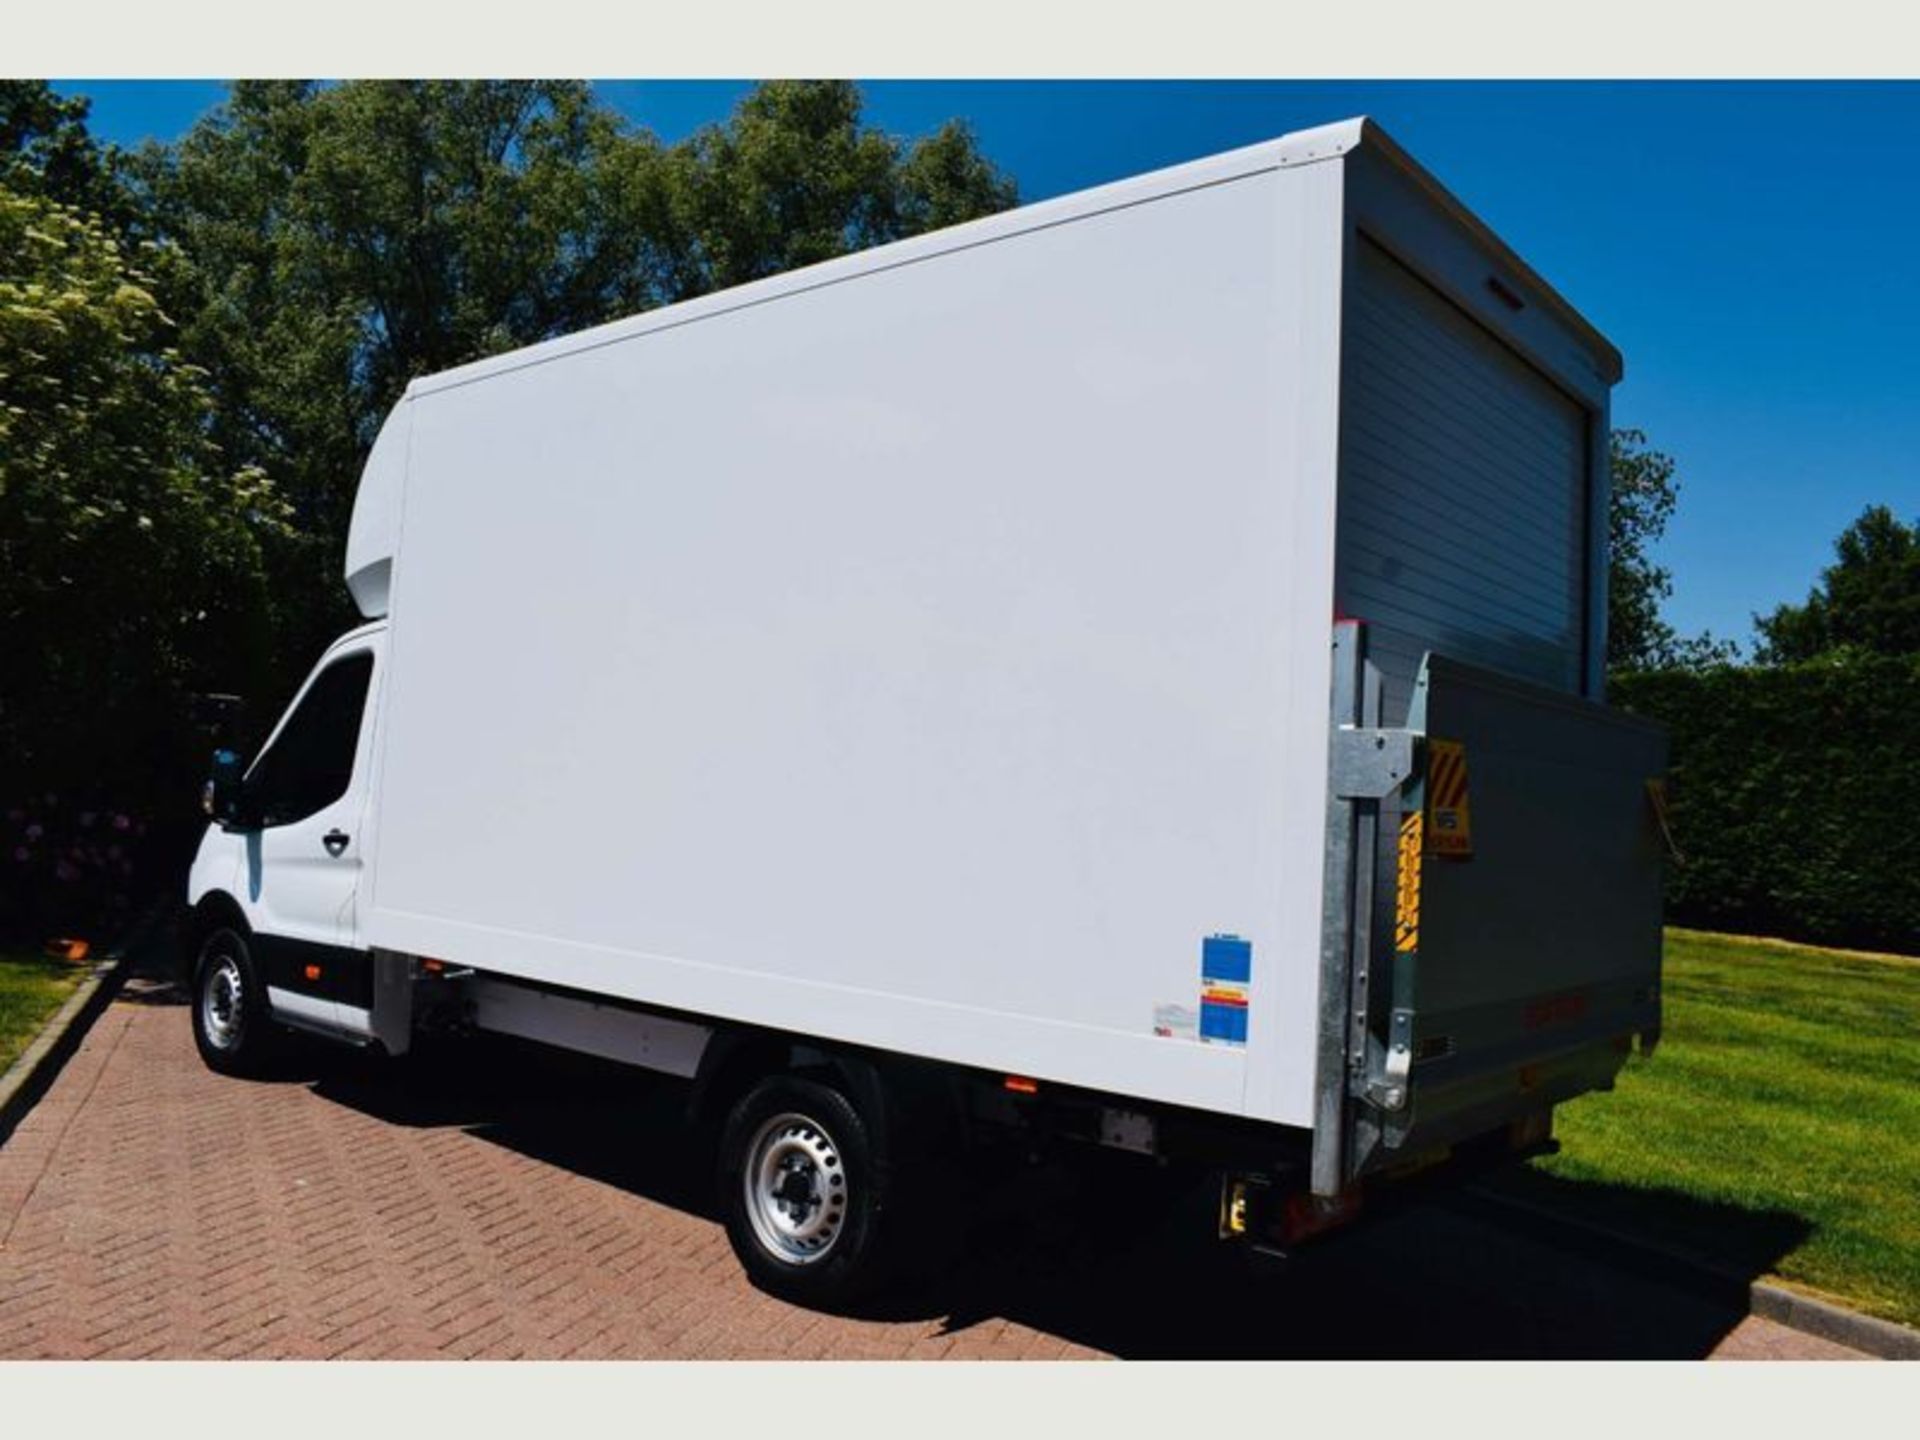 (On Sale) FORD TRANSIT 350 L4 2.0TDCI "130" LUTON BOX WITH ELECTRIC TAIL LIFT - 2019 MODEL - EURO 6 - Image 3 of 6